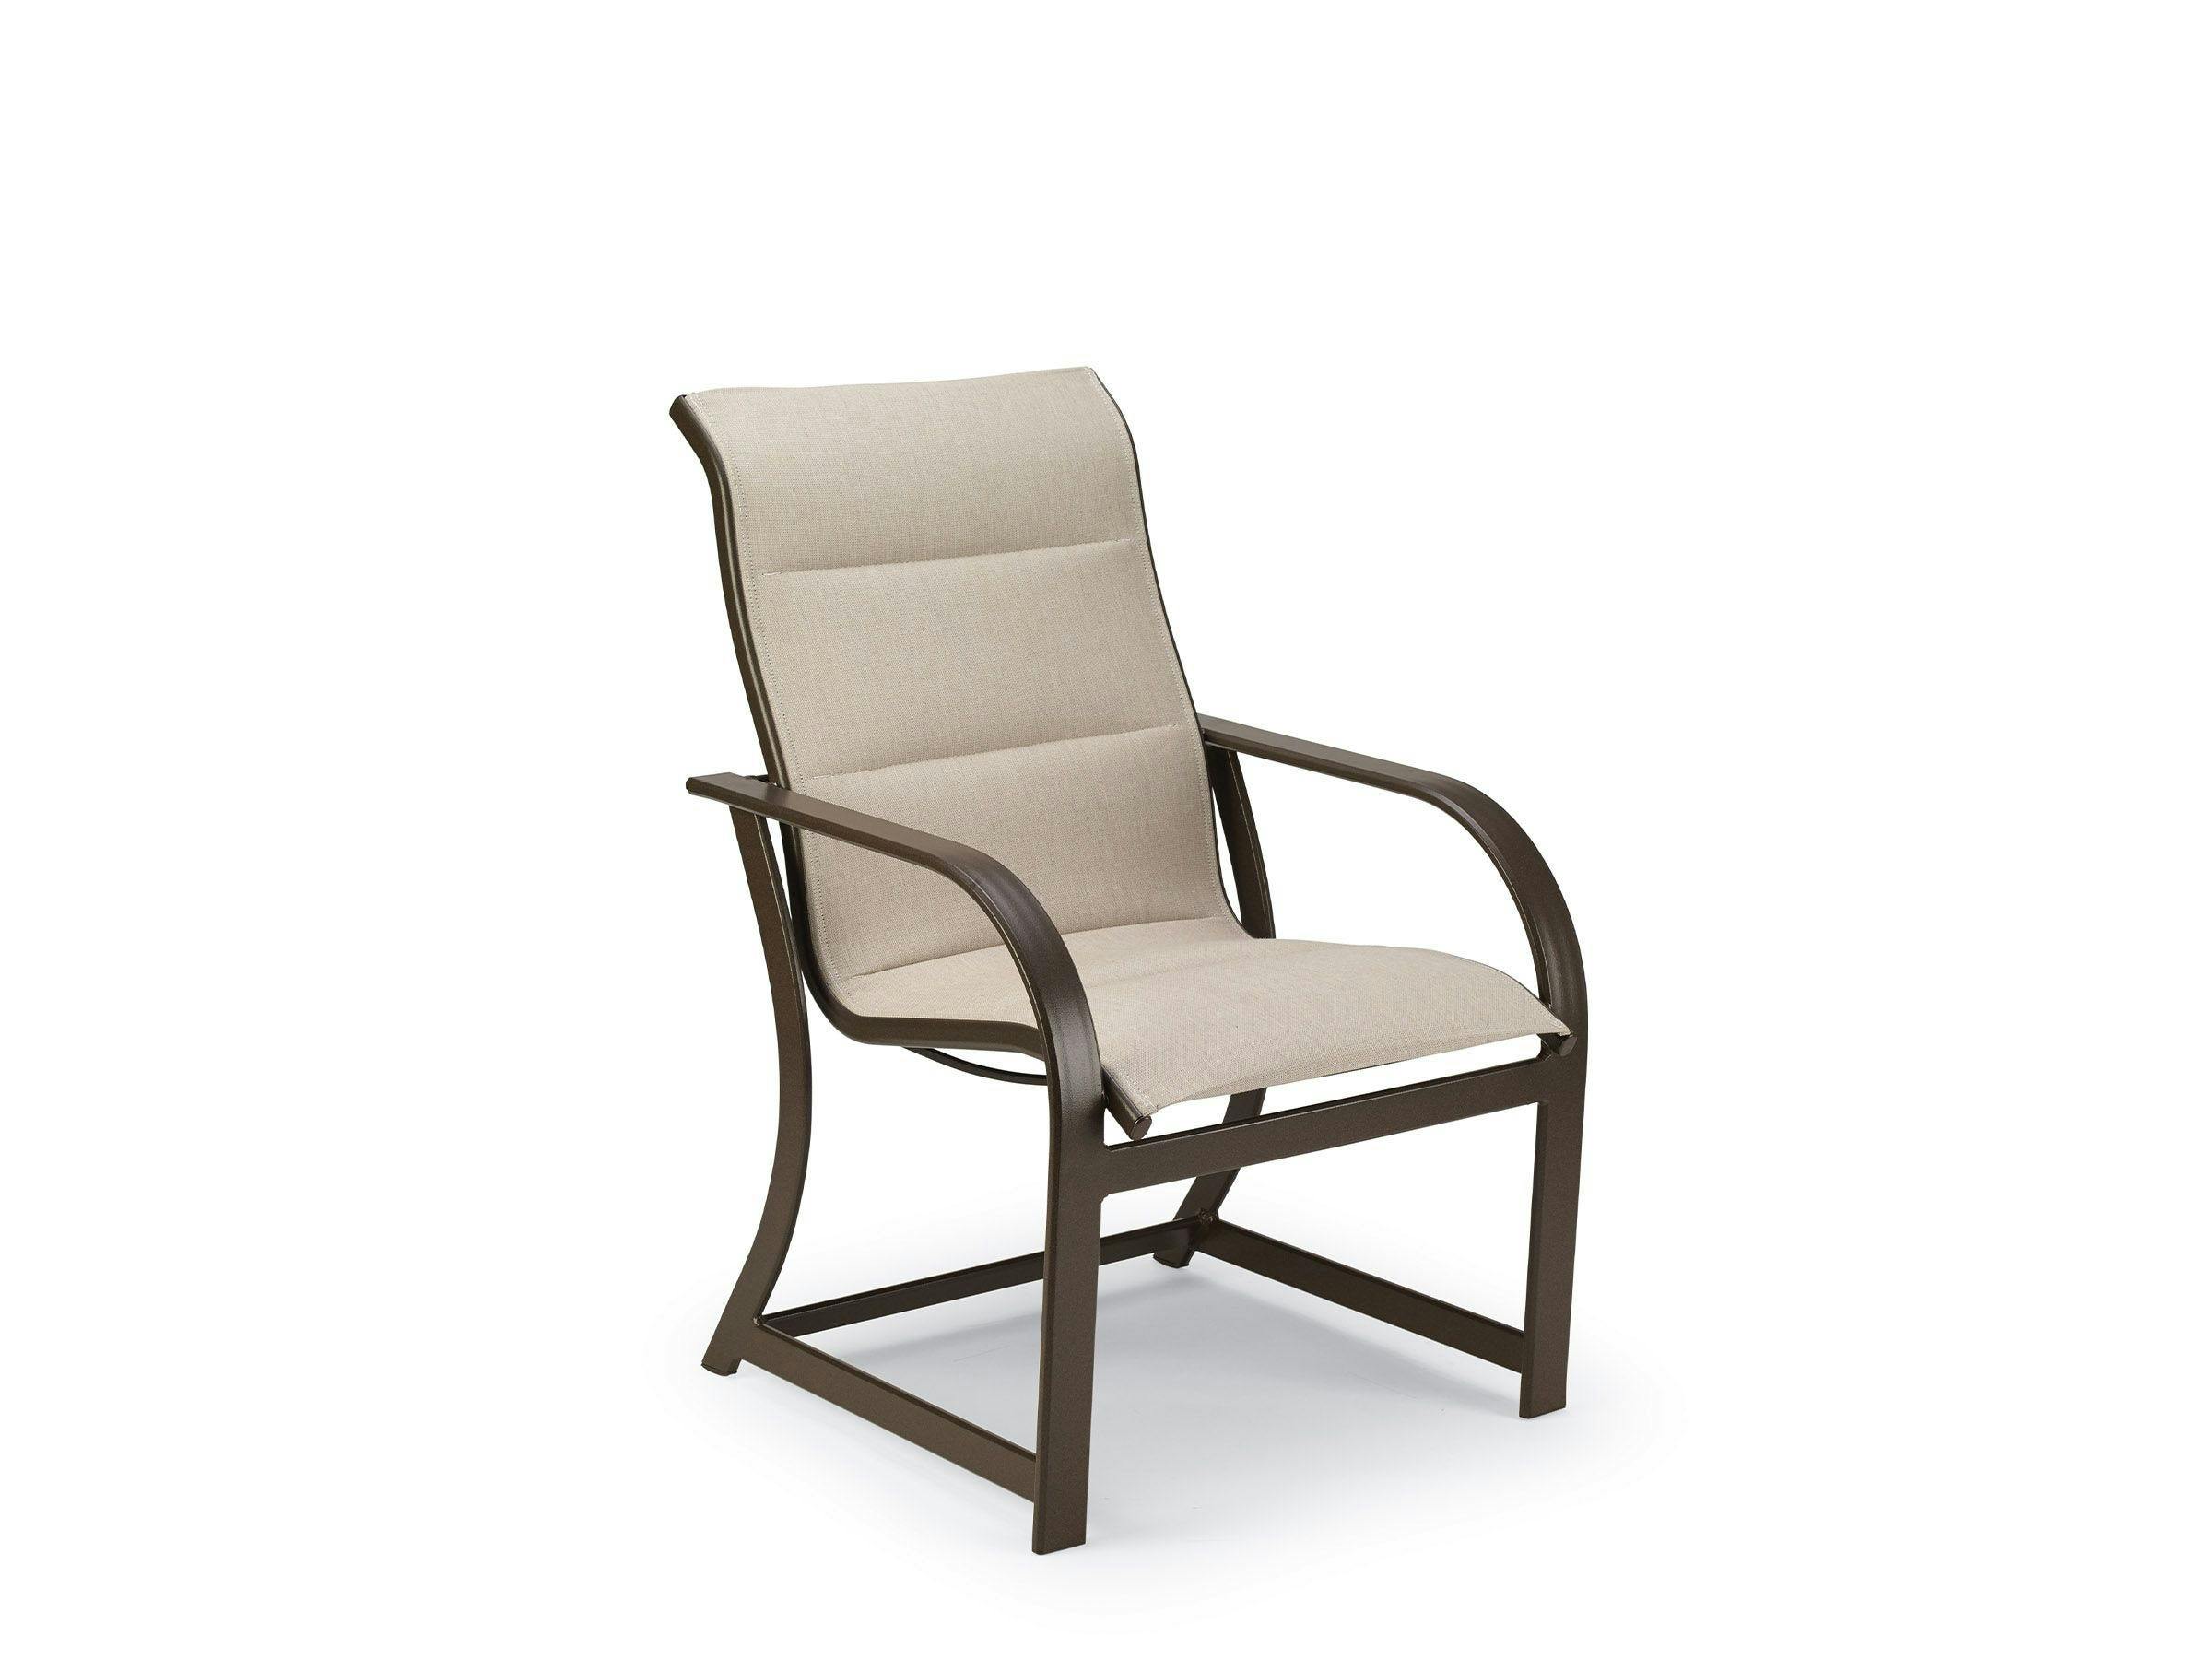 Key West Padded Sling High Back Dining Chair